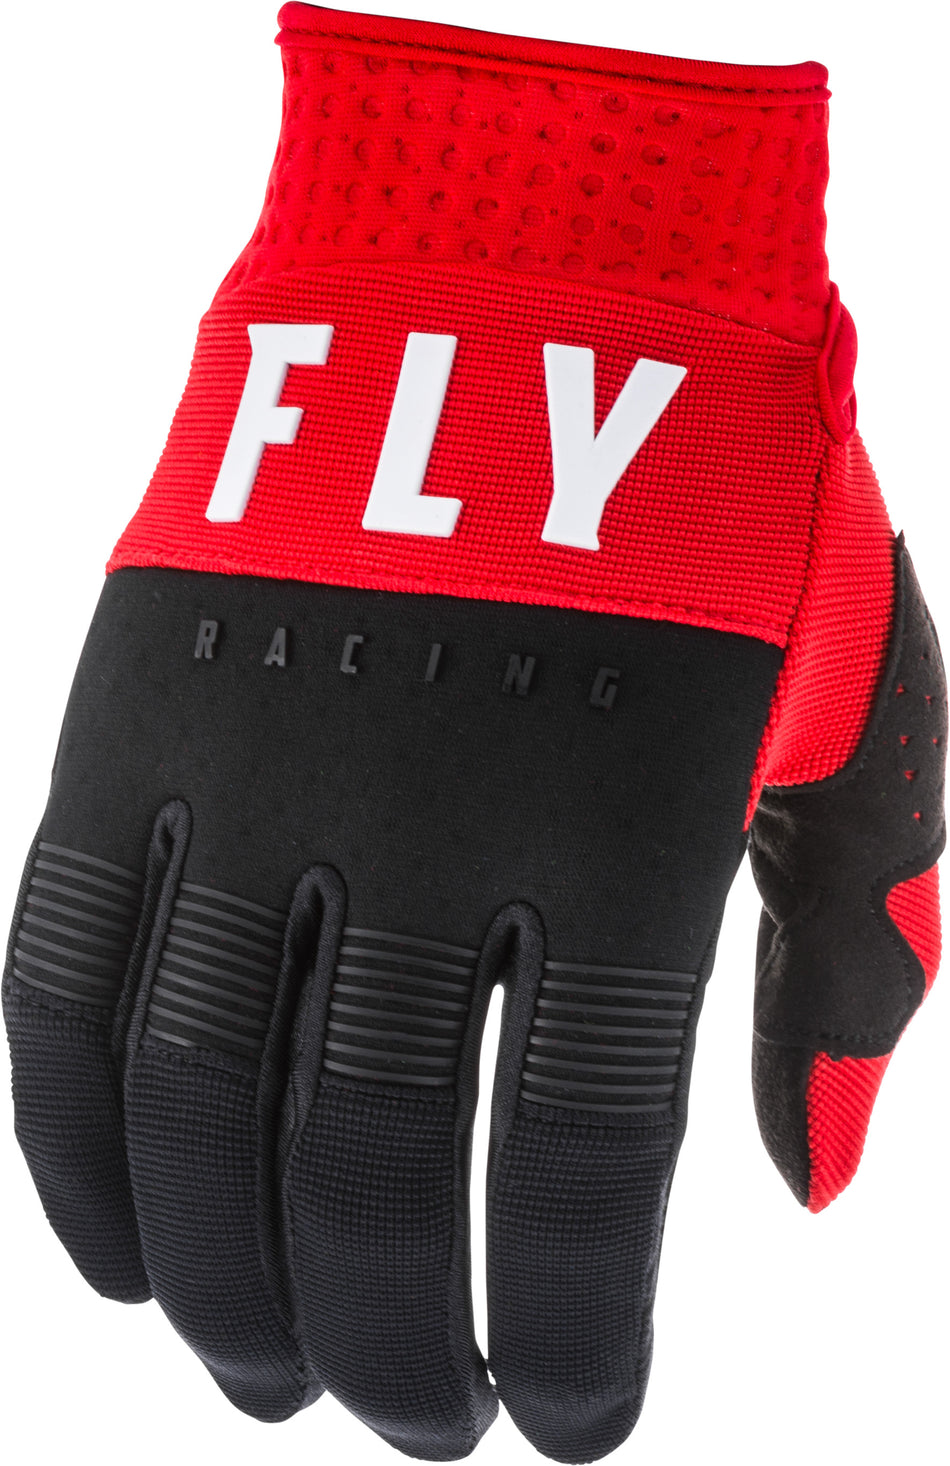 FLY RACING F-16 Gloves Red/Black/White Sz 04 373-91304